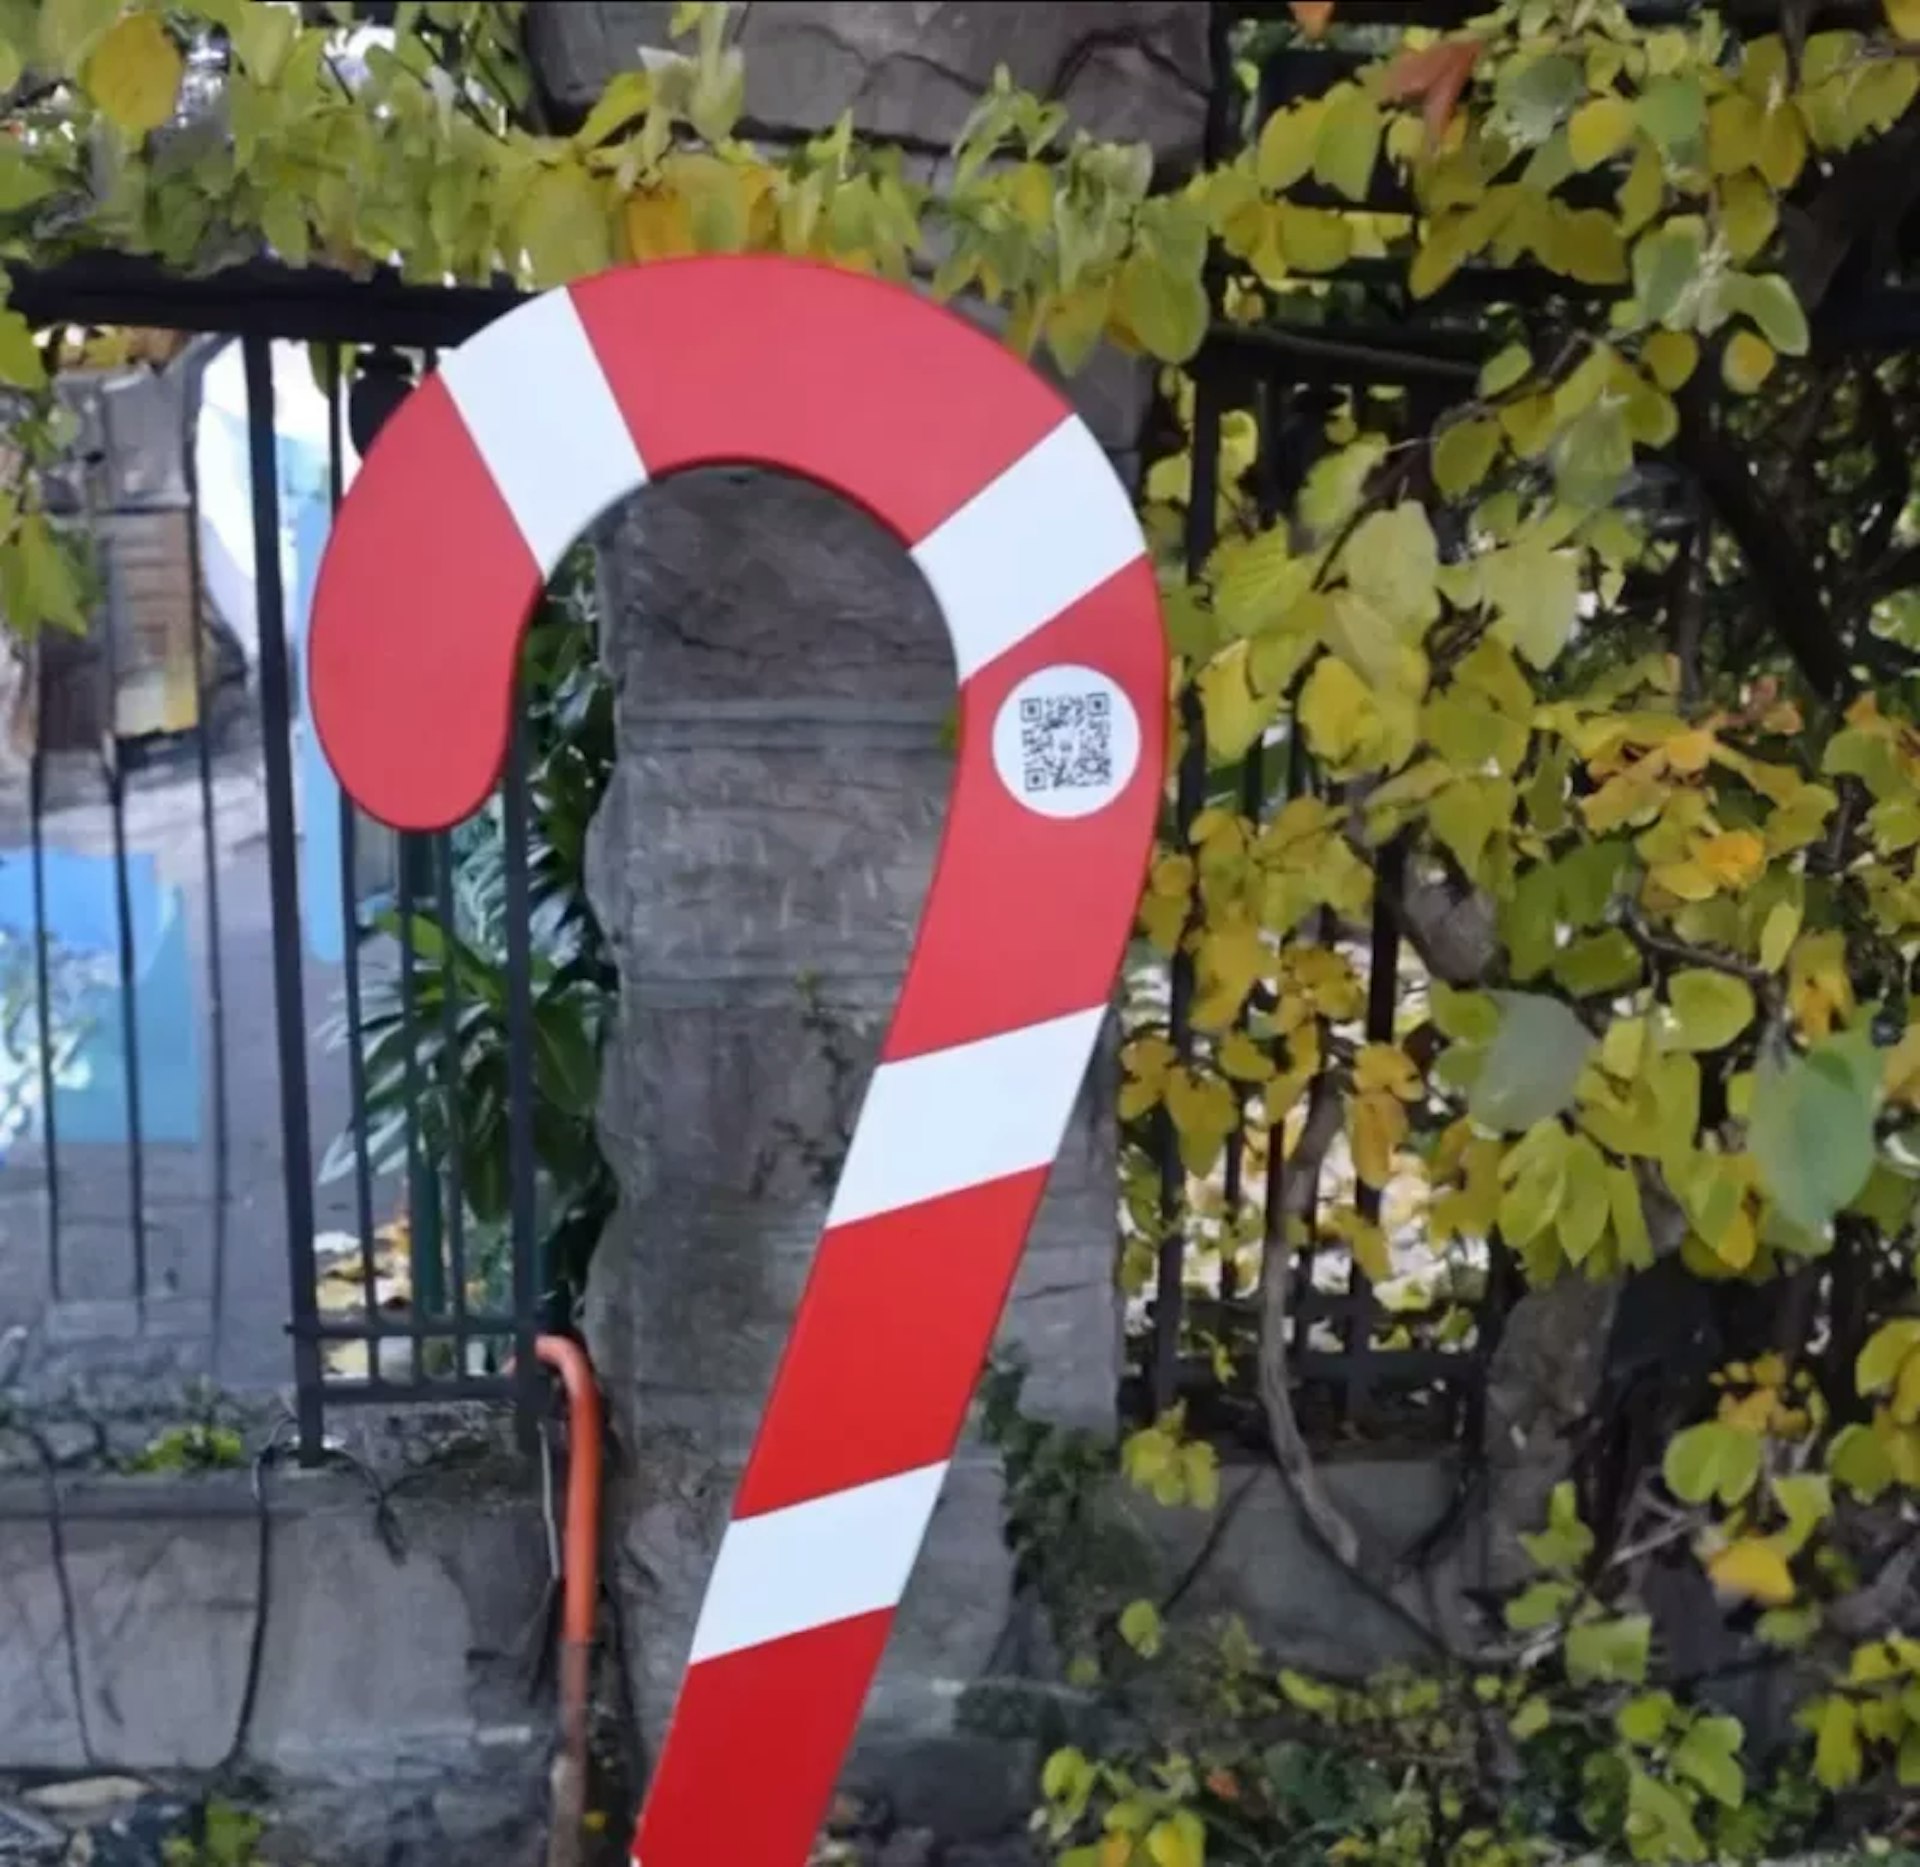 Giant candy canes decorated for Christmas